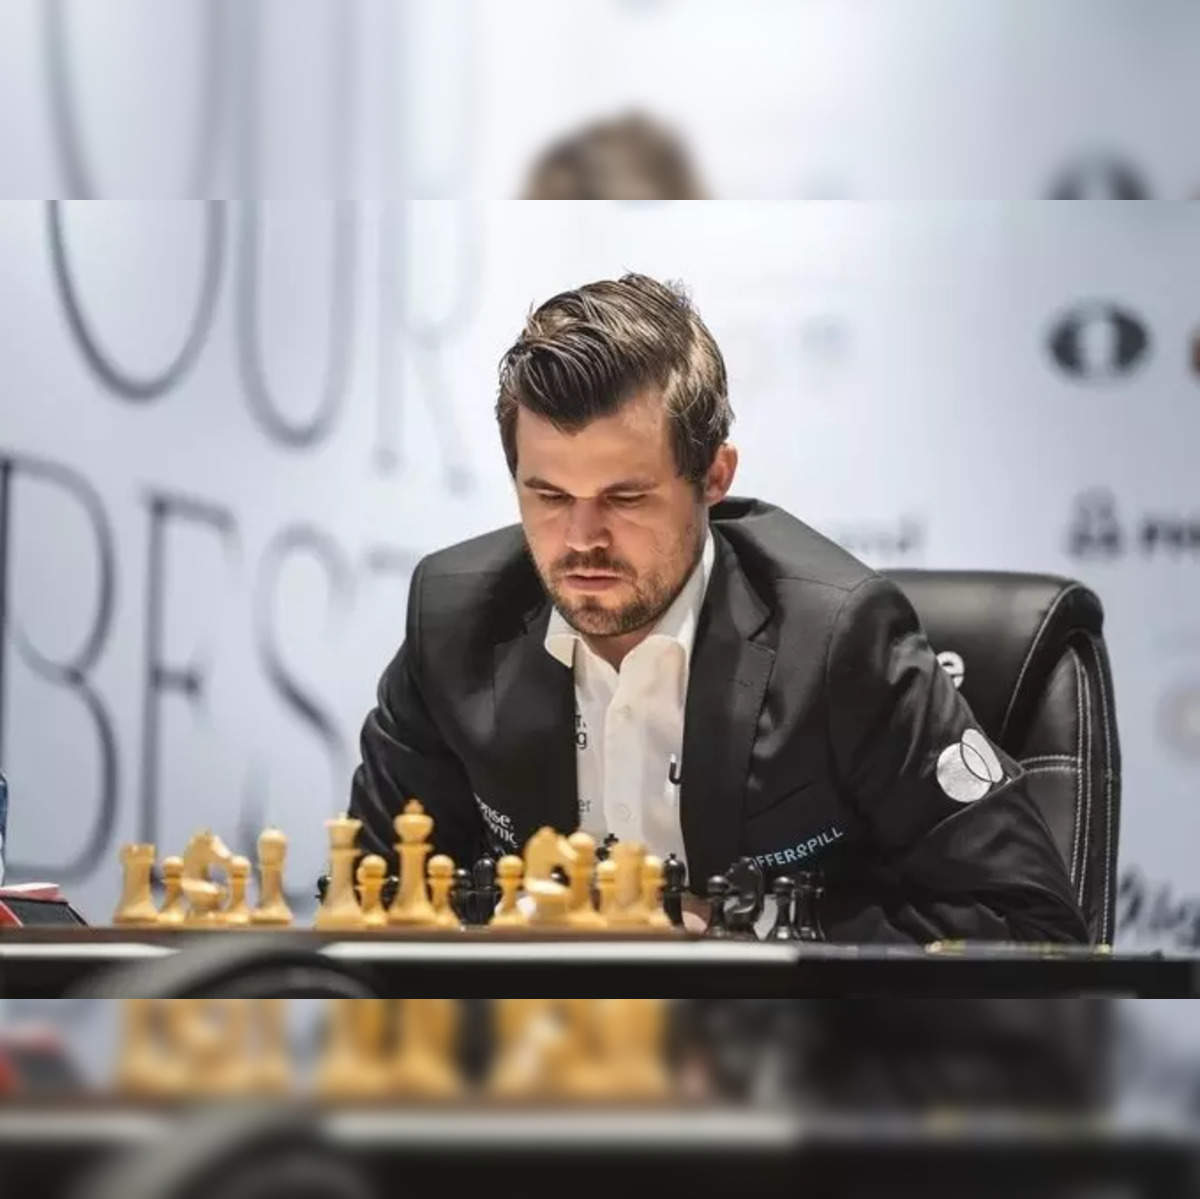 Lacking motivation, Carlsen not to defend title at 2023 World Chess